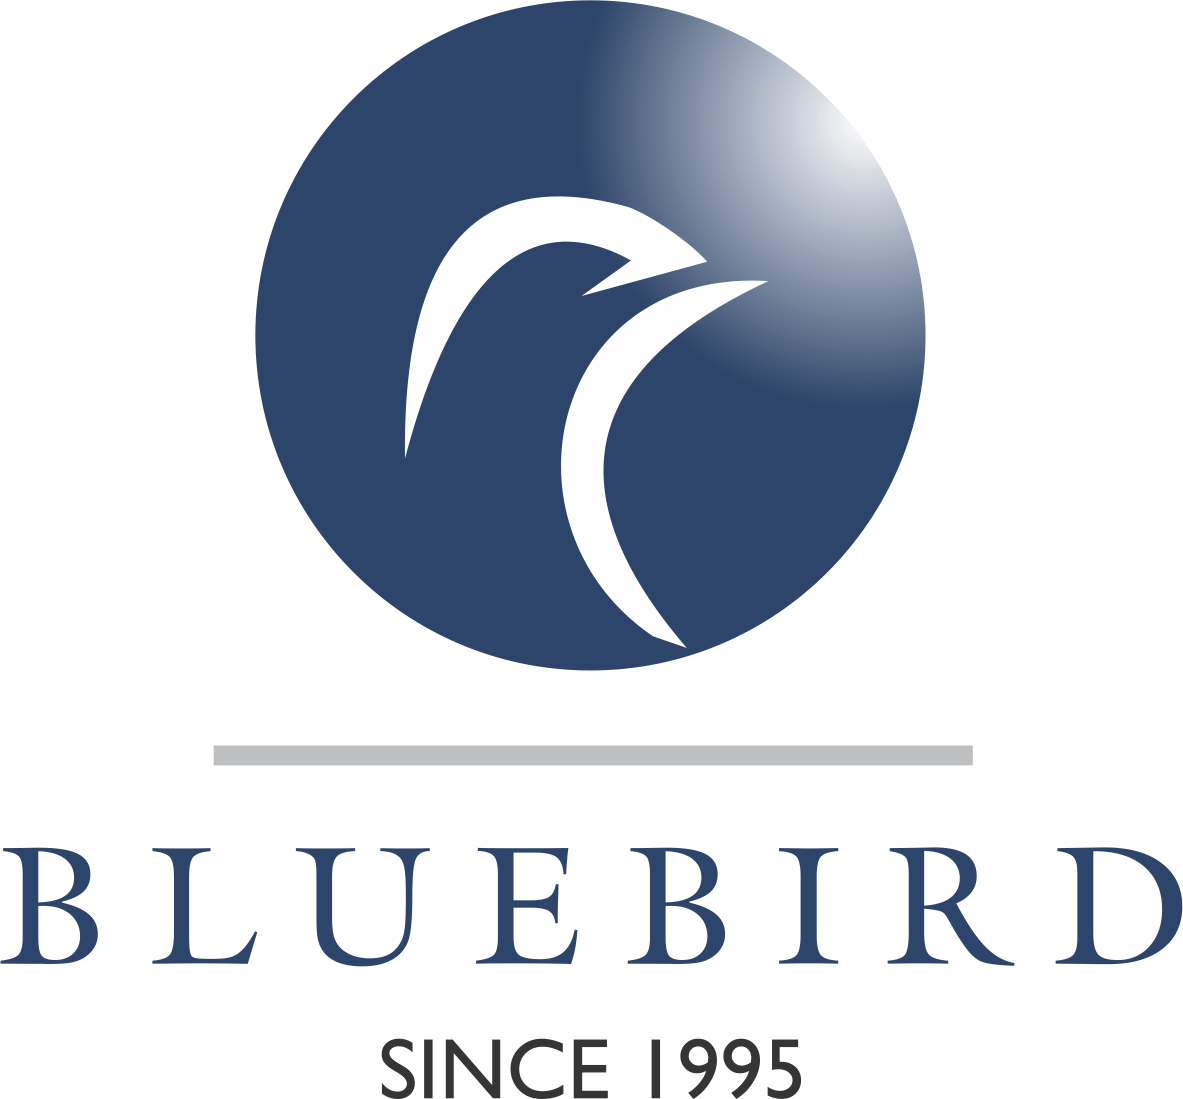 Blue Bird Brand Logo - Bluebird – Your brand can learn to fly.